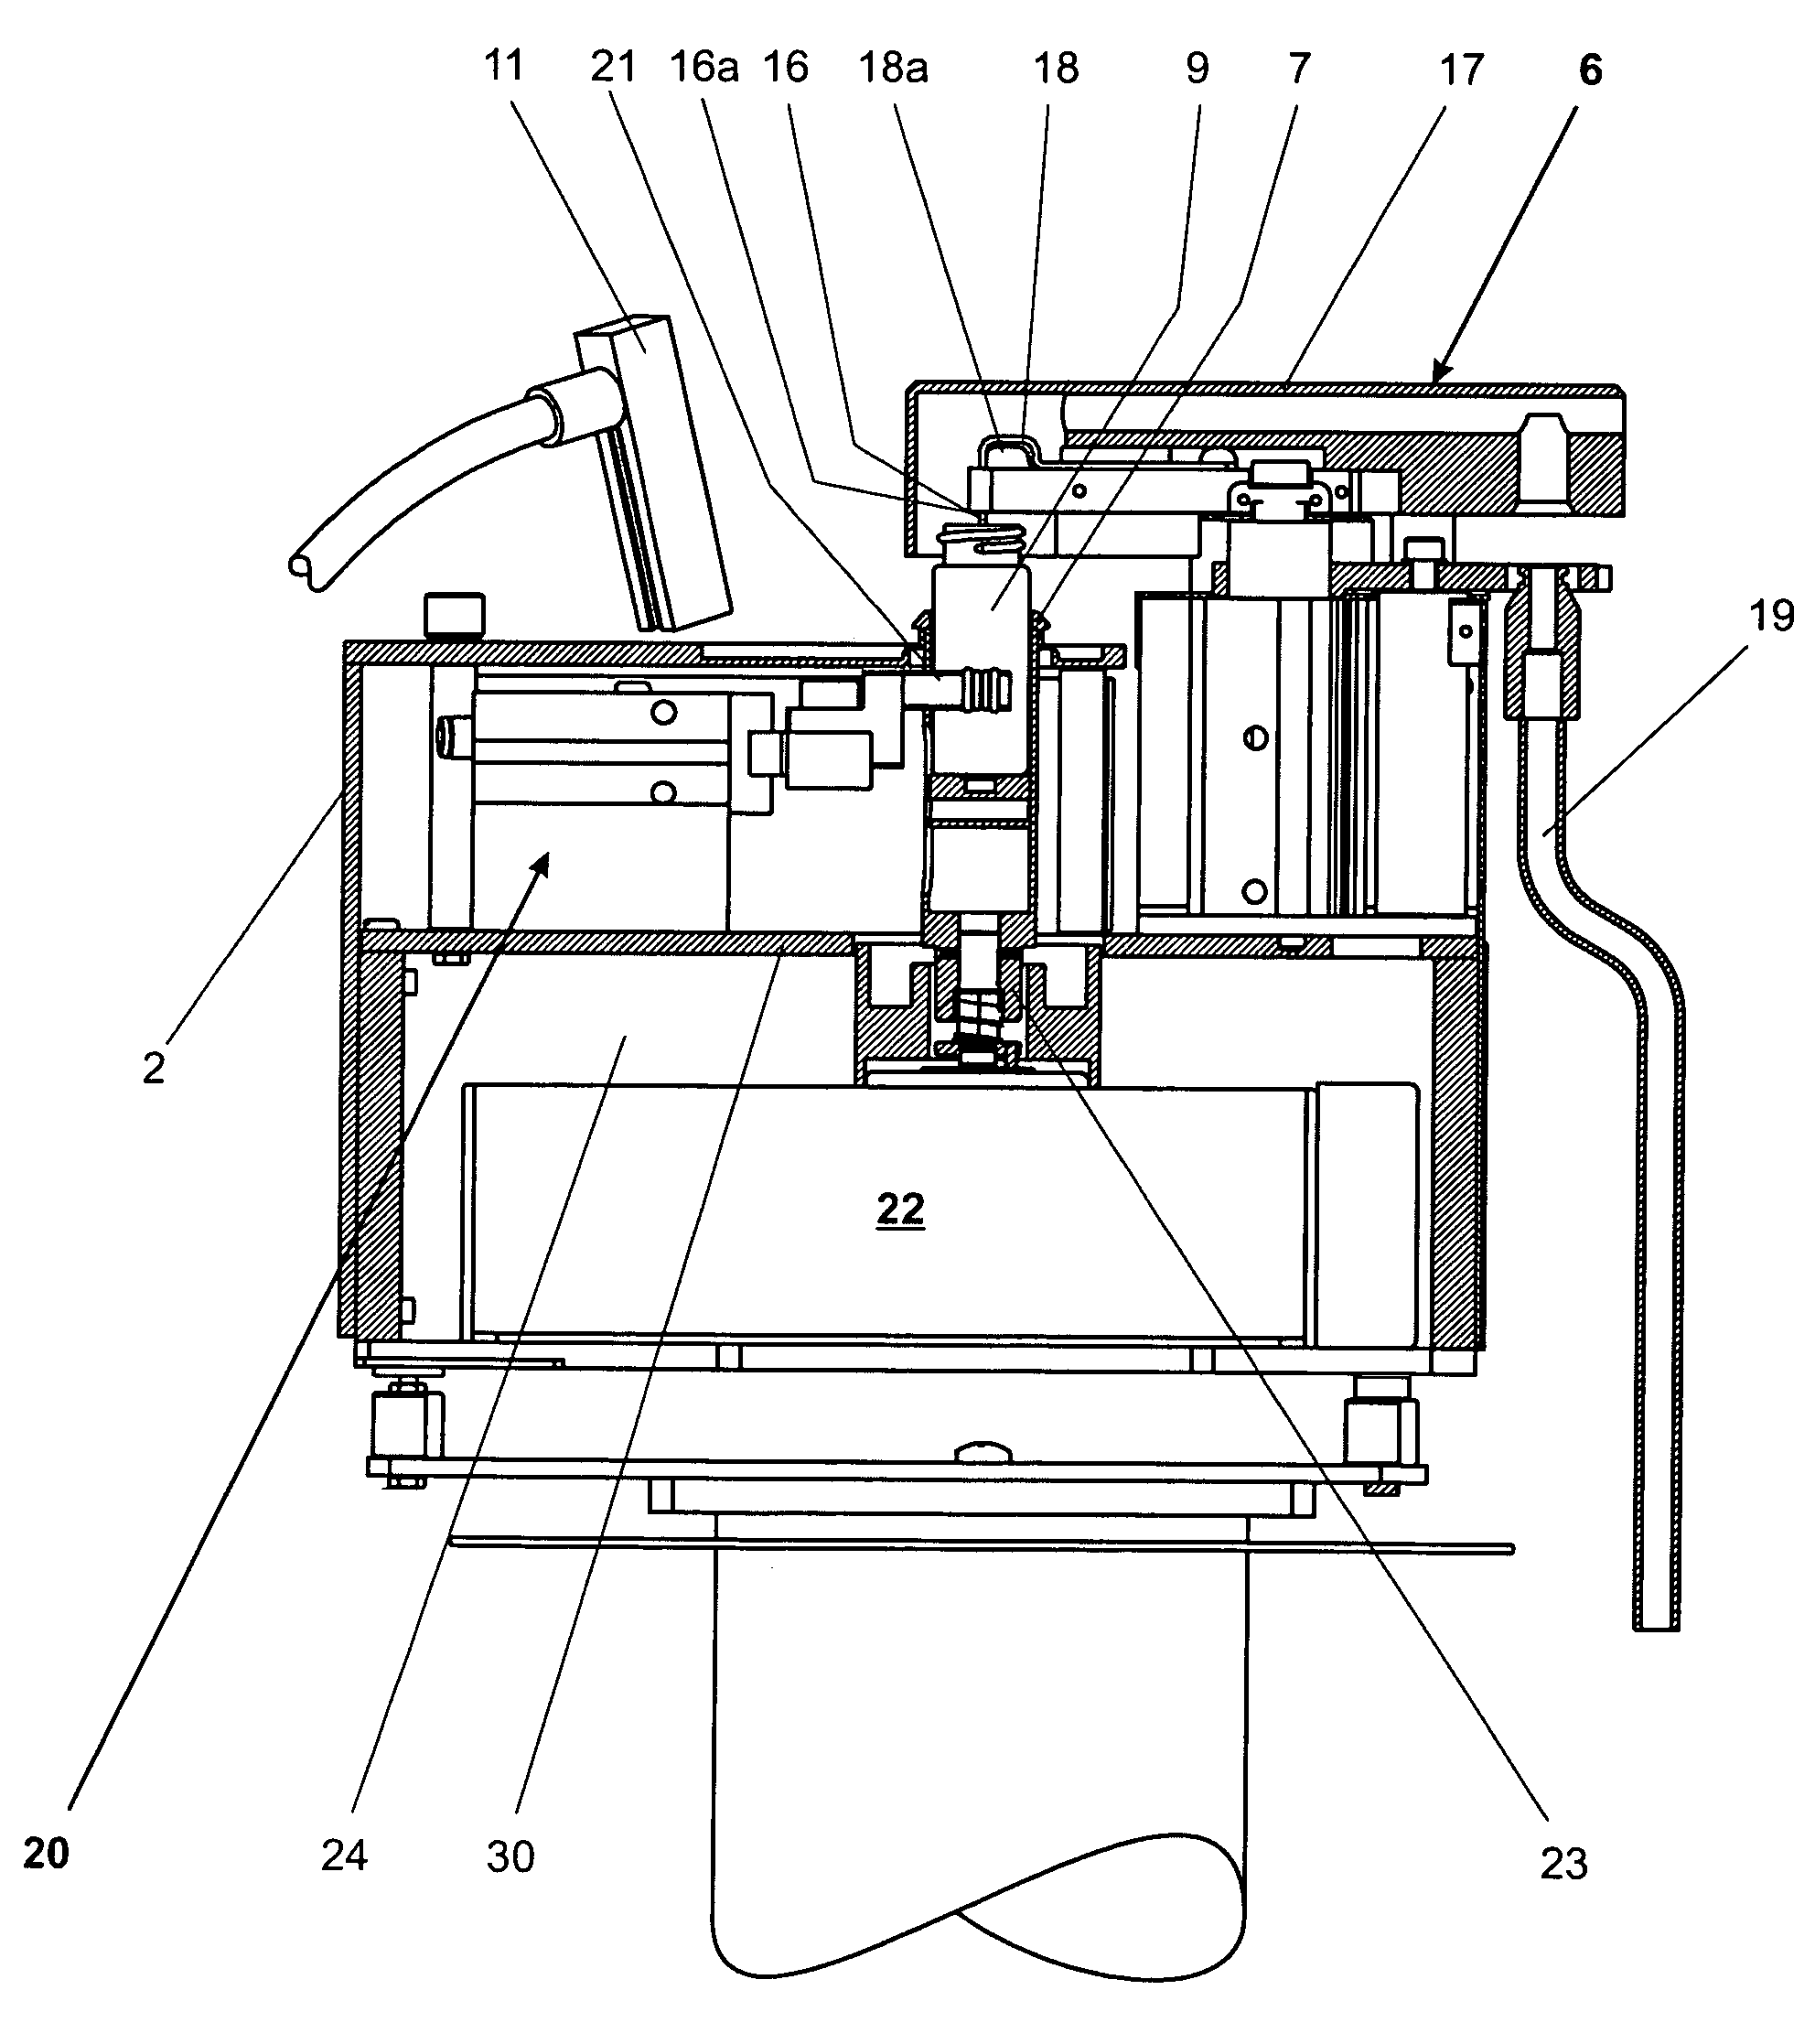 Apparatus and method for dispensing substances into containers